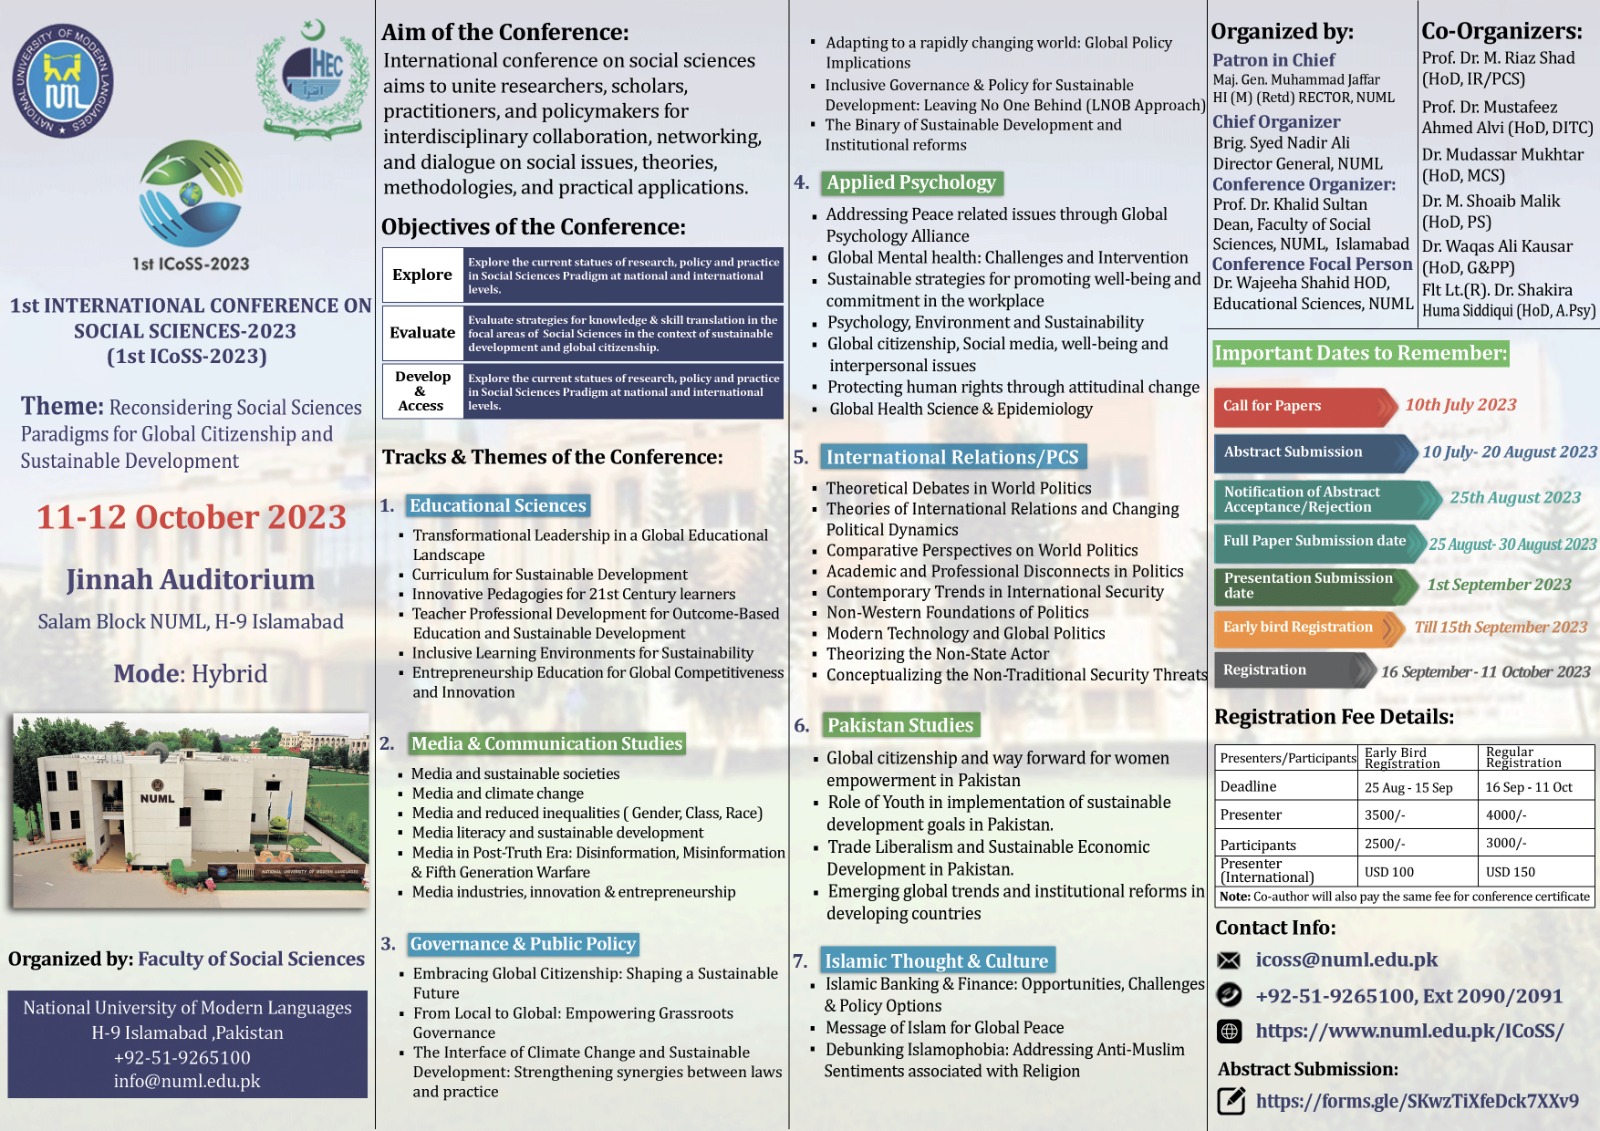 Announcement: 1st International Conference on Social Sciences – 2023 (1st ICoSS)